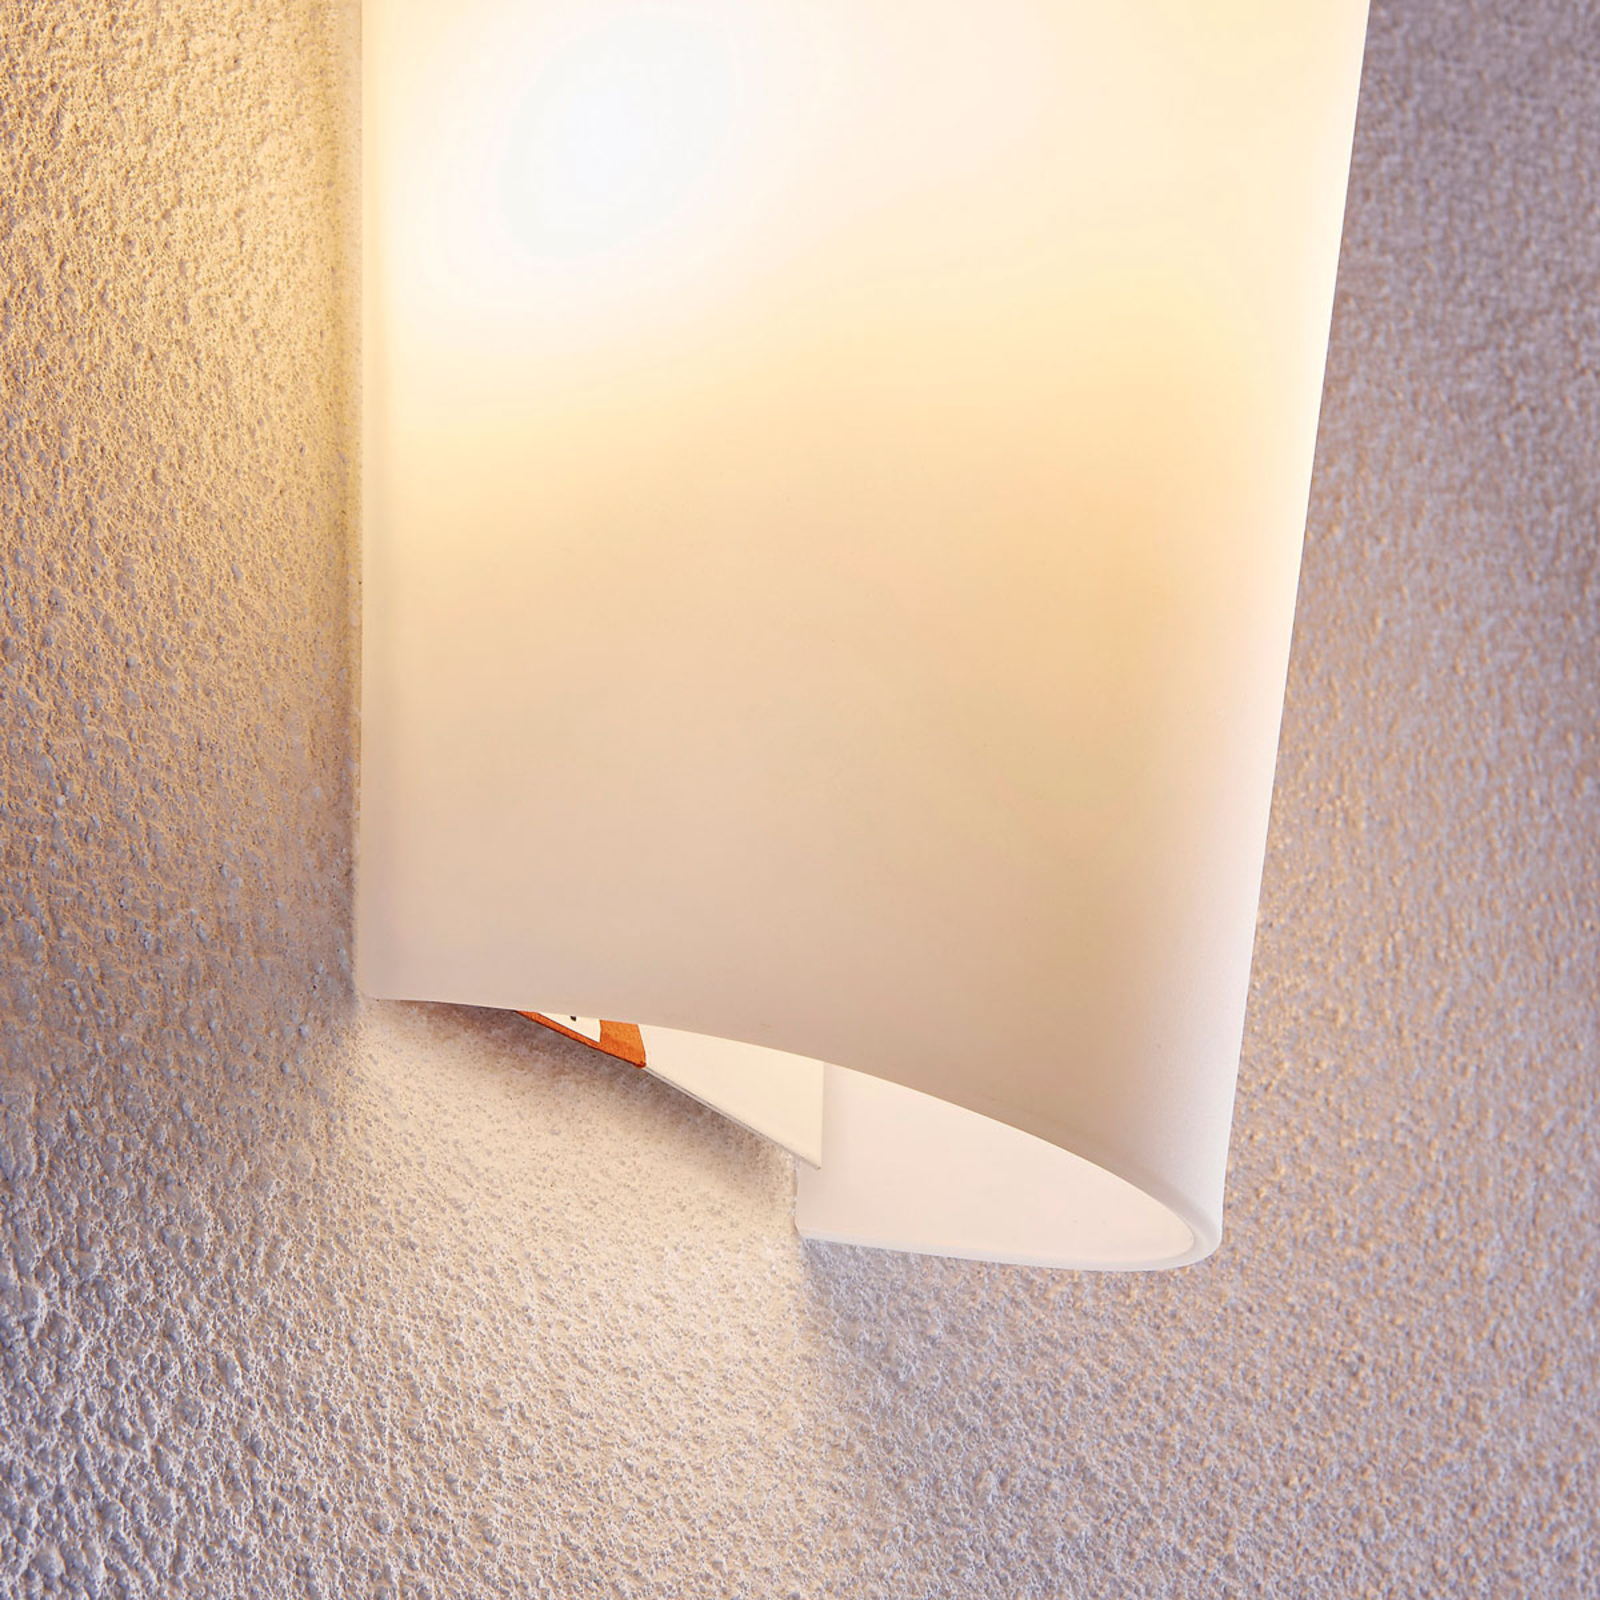 Aurora - elegant wall lamp with a glass lampshade